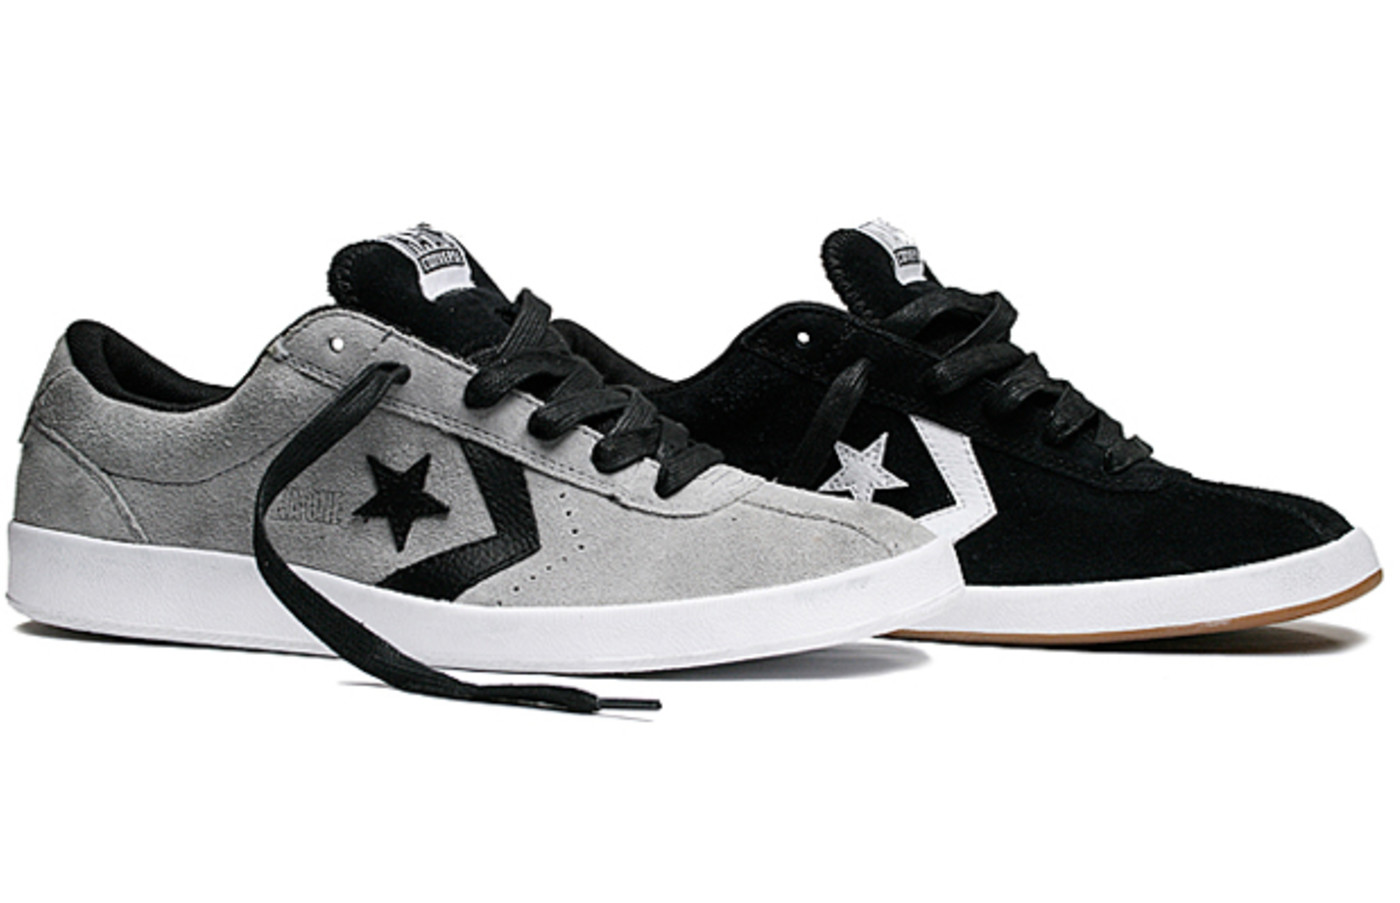 Converse KA-One “Kenny Anderson” | Complex